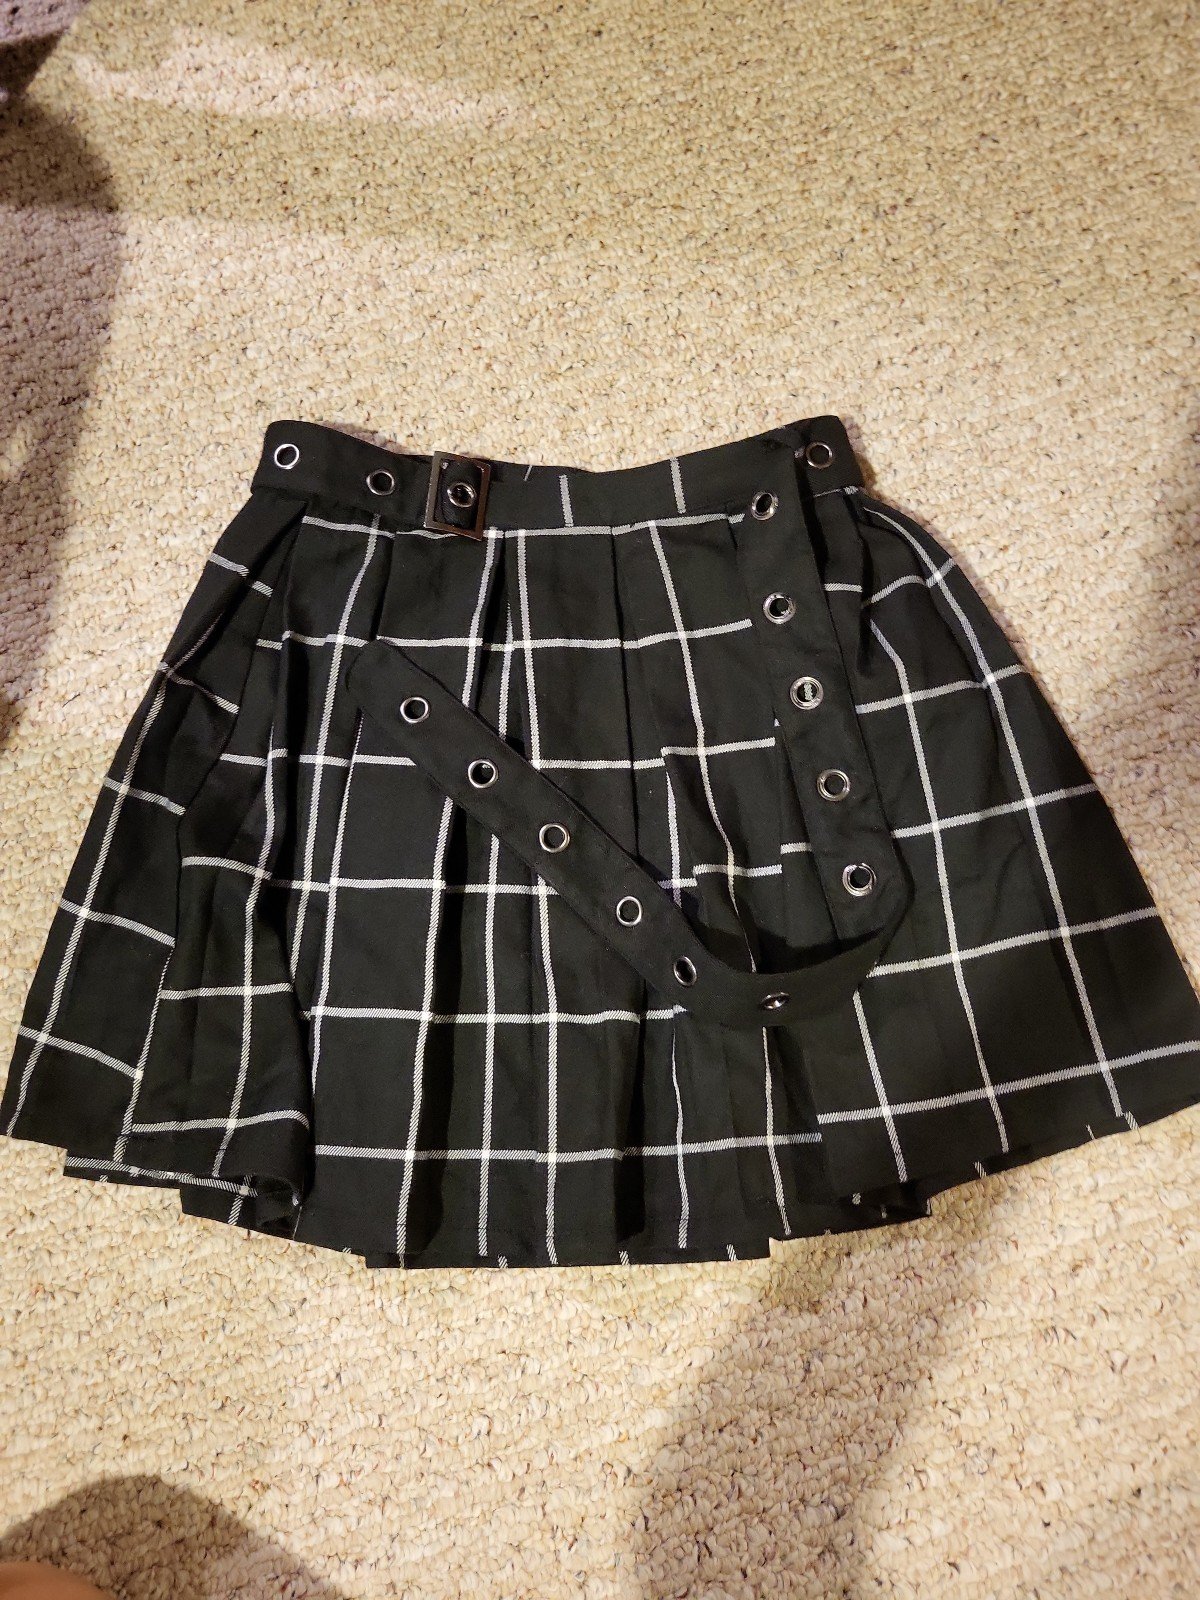 Gorgeous Pleated graph skirt with belt n3FQUBvG4 Buying